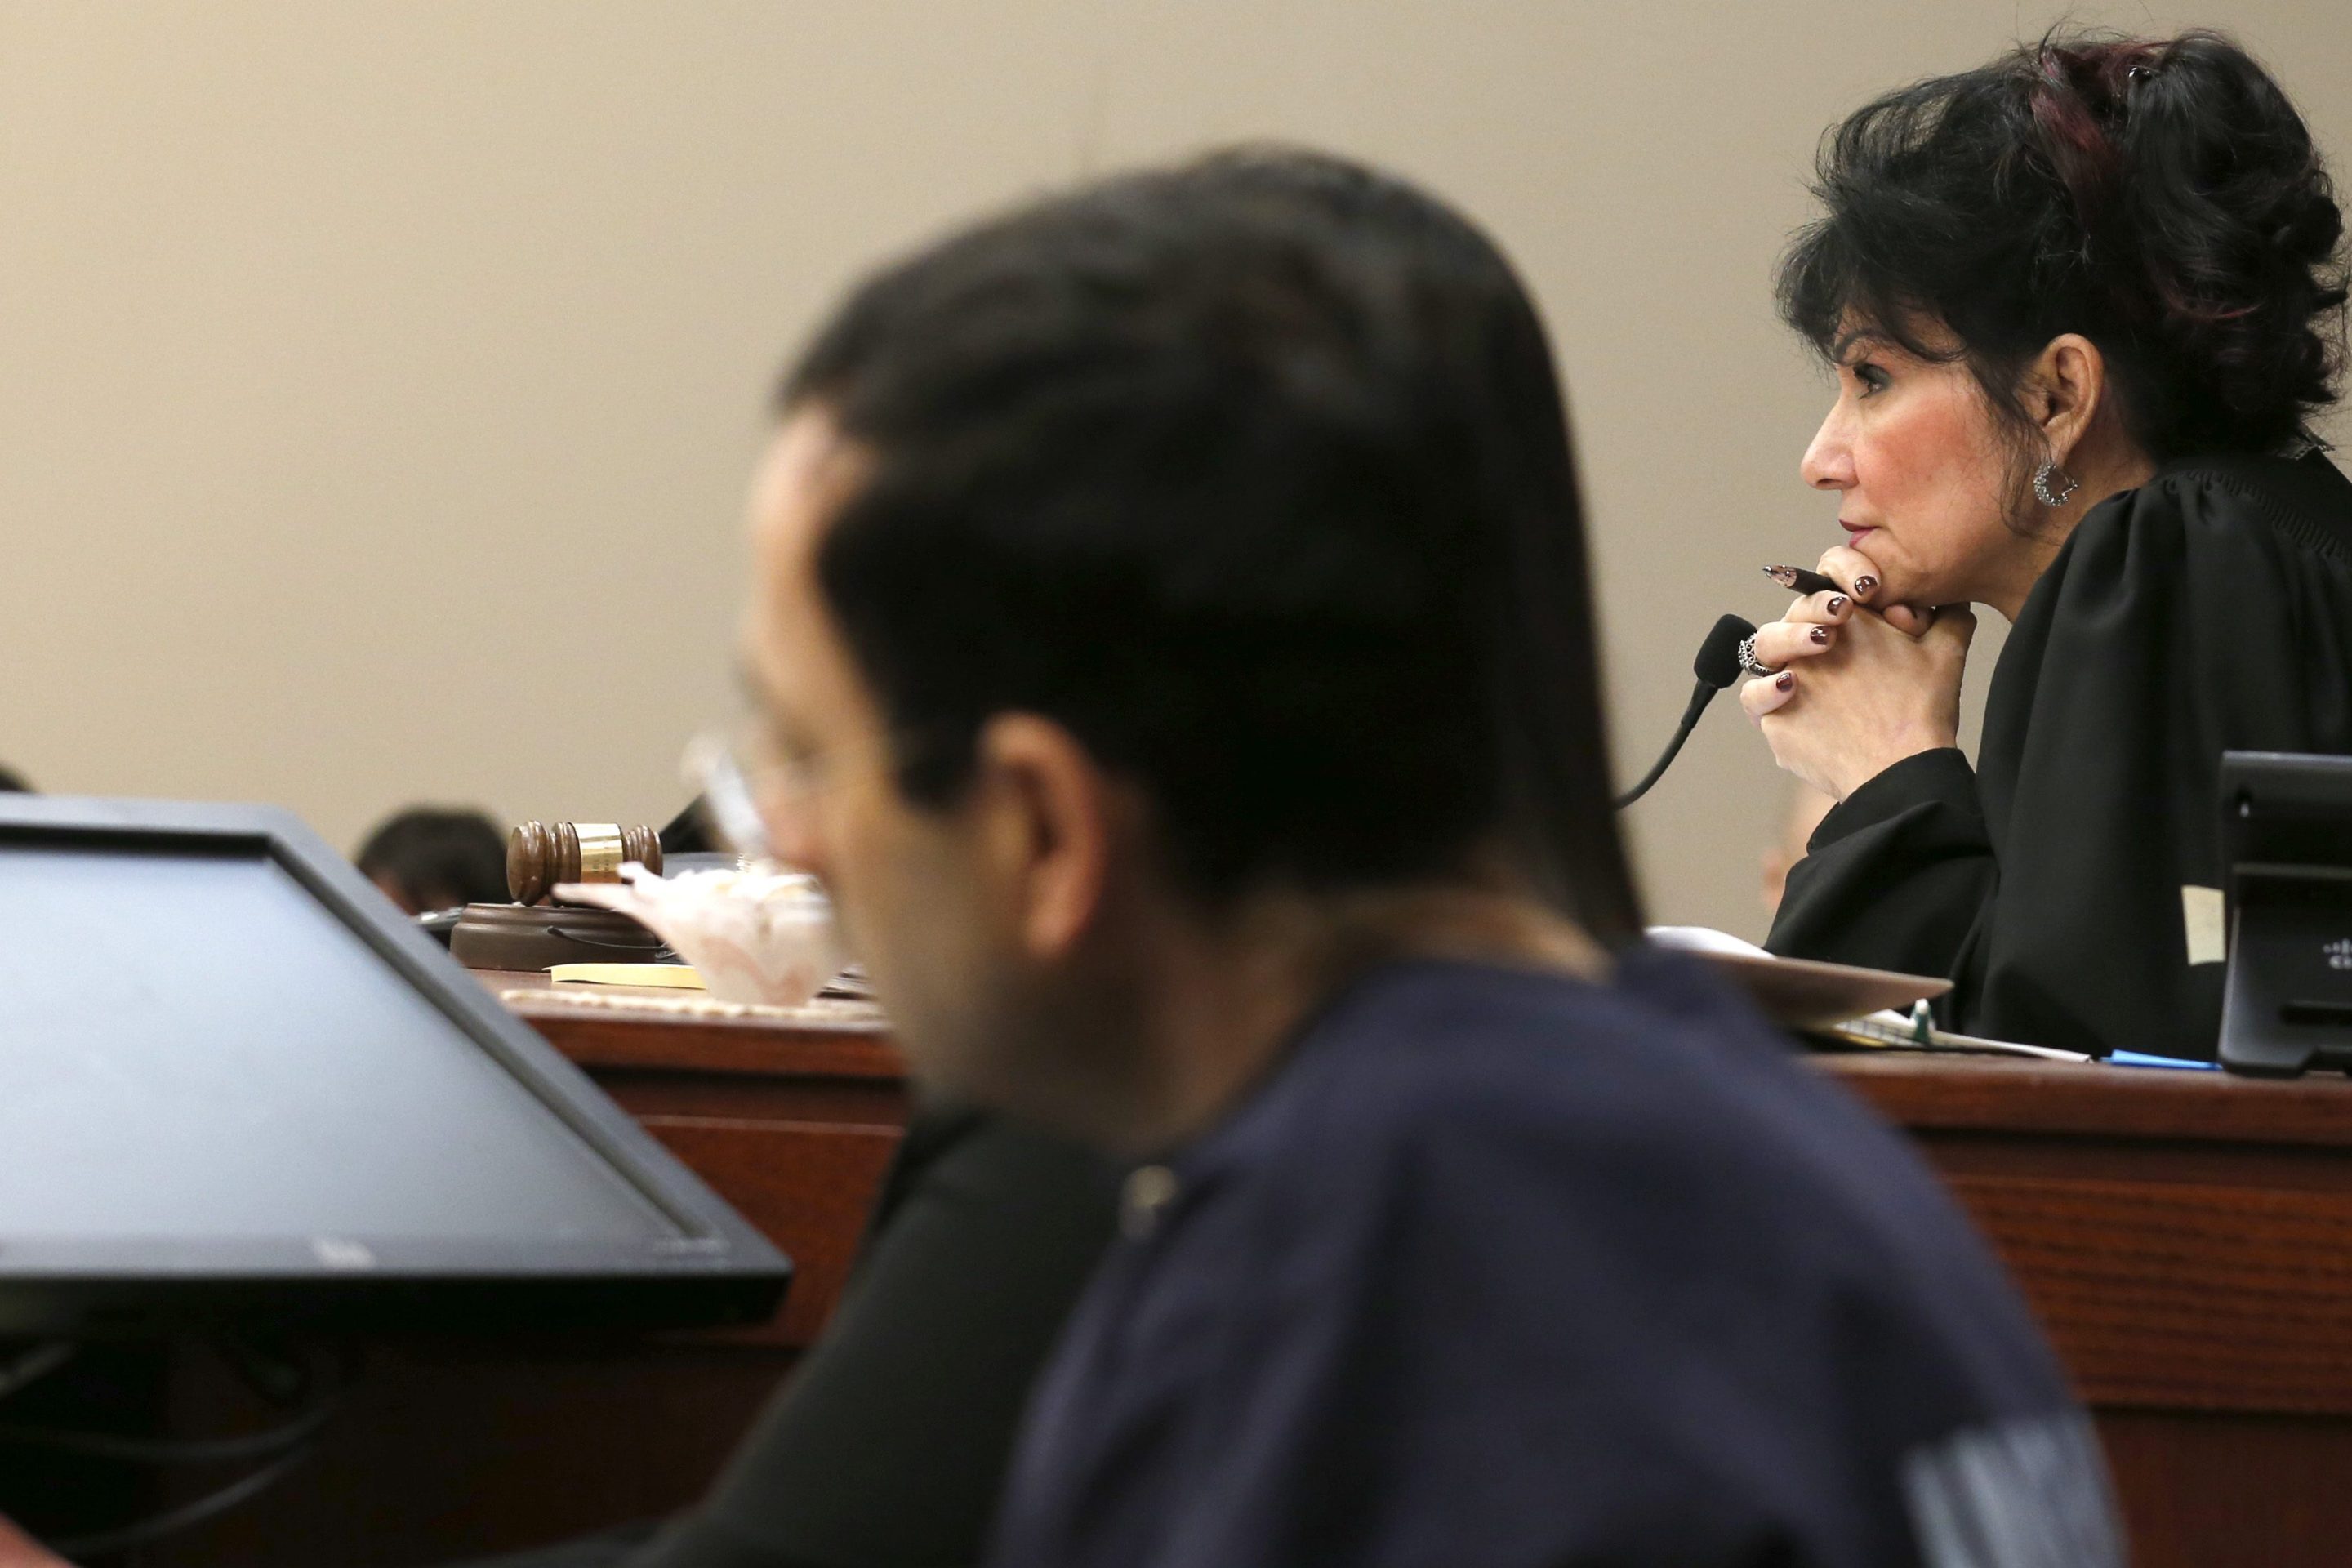 Judge Rosemarie Aquilina watches as Former Michigan State University and USA Gymnastics doctor Larry Nassar listens to impact statements during the sentencing phase in Ingham County Circuit Court on January 24, 2018 in Lansing, Michigan.